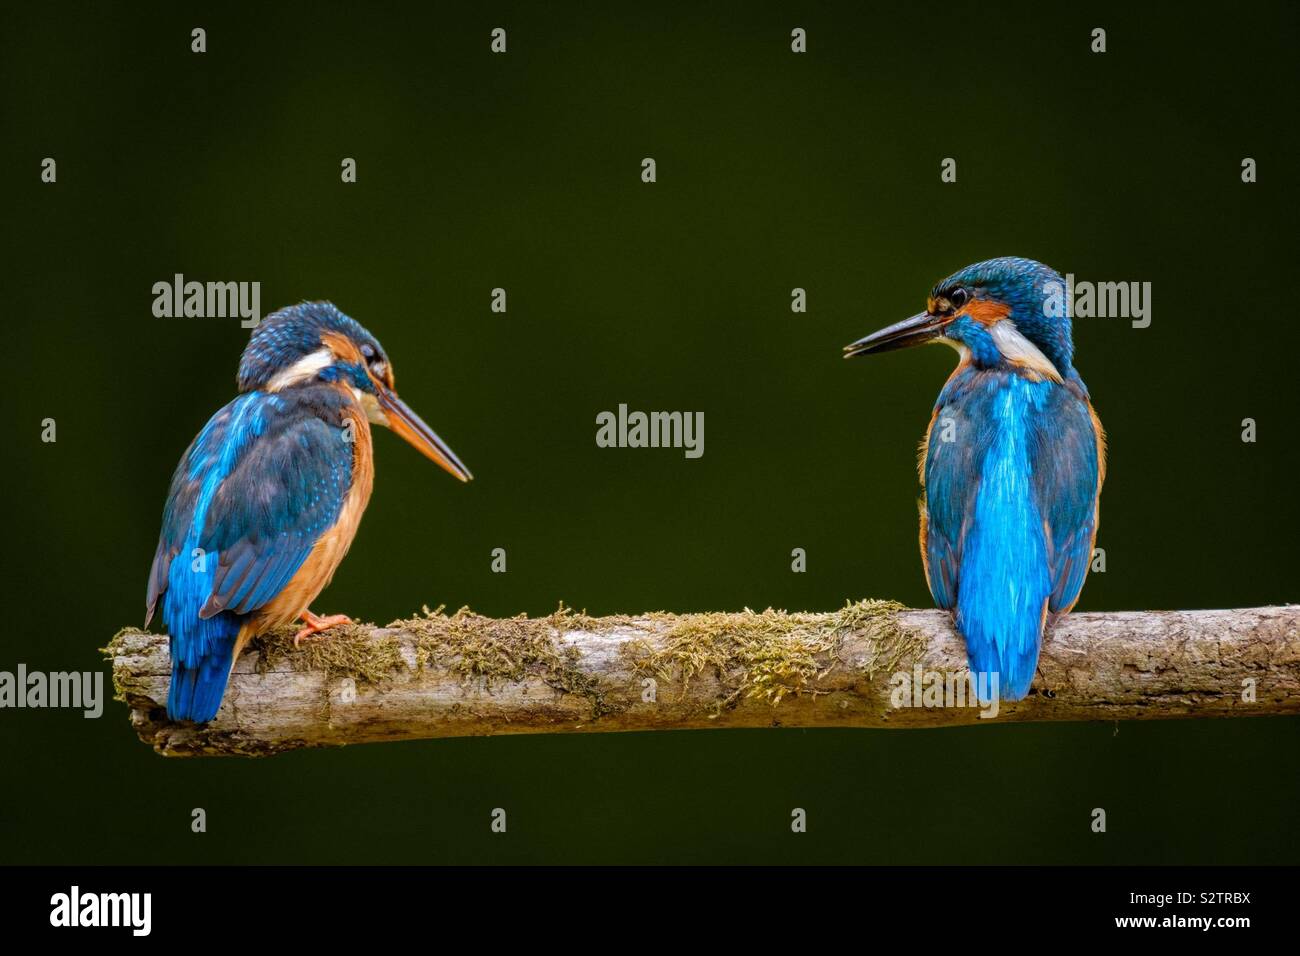 A breeding pair of Kingfishers on a branch. Stock Photo